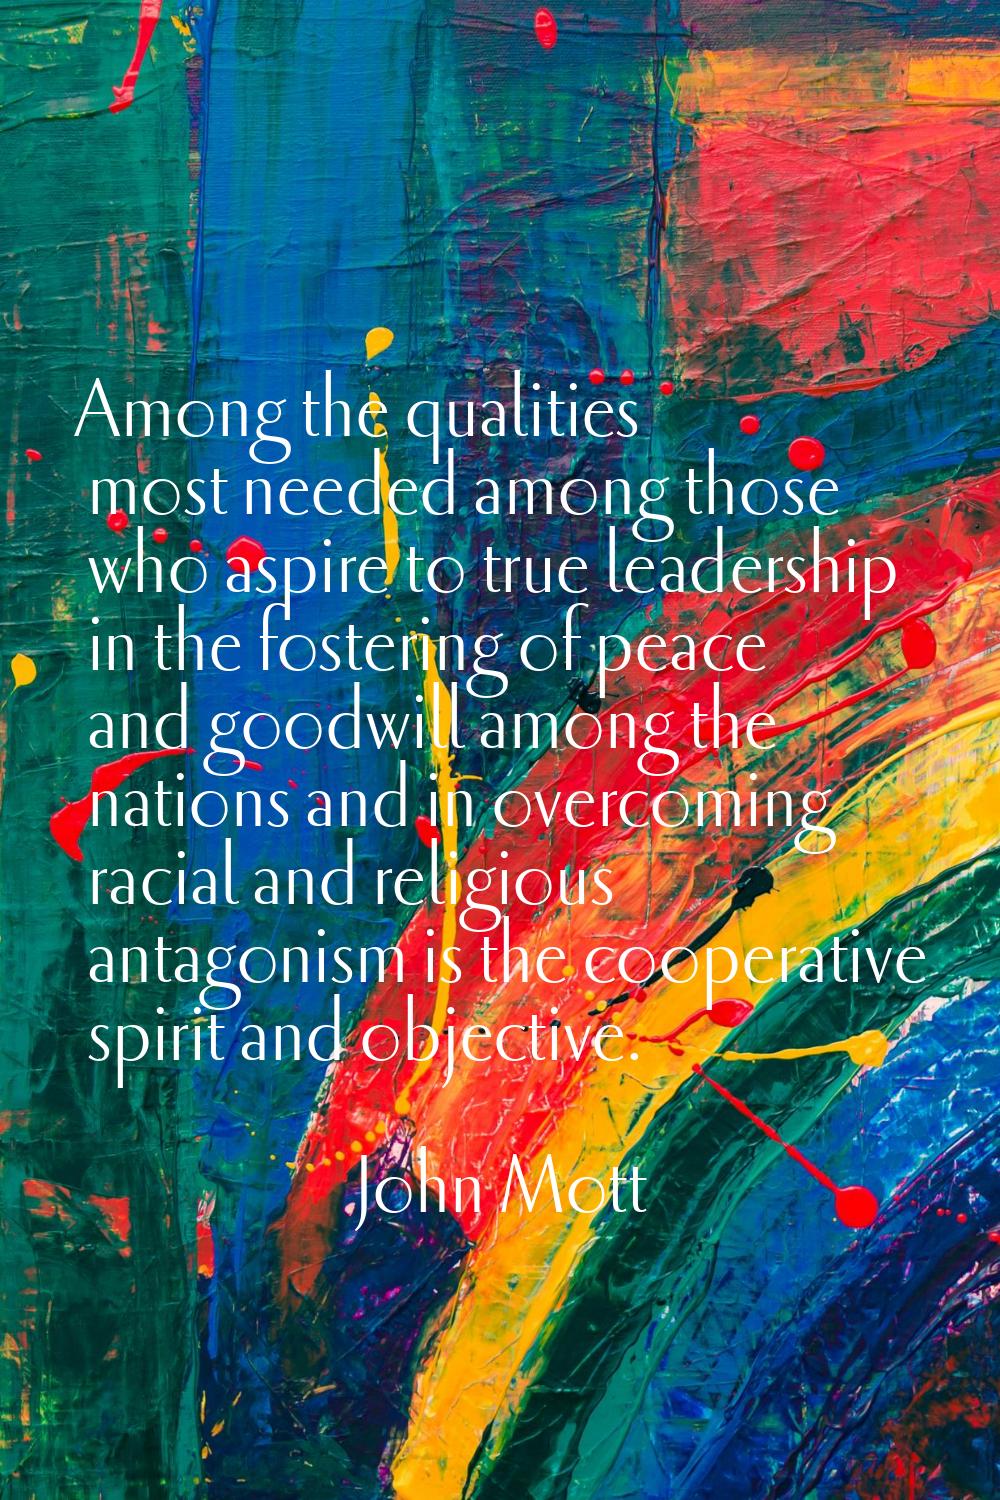 Among the qualities most needed among those who aspire to true leadership in the fostering of peace